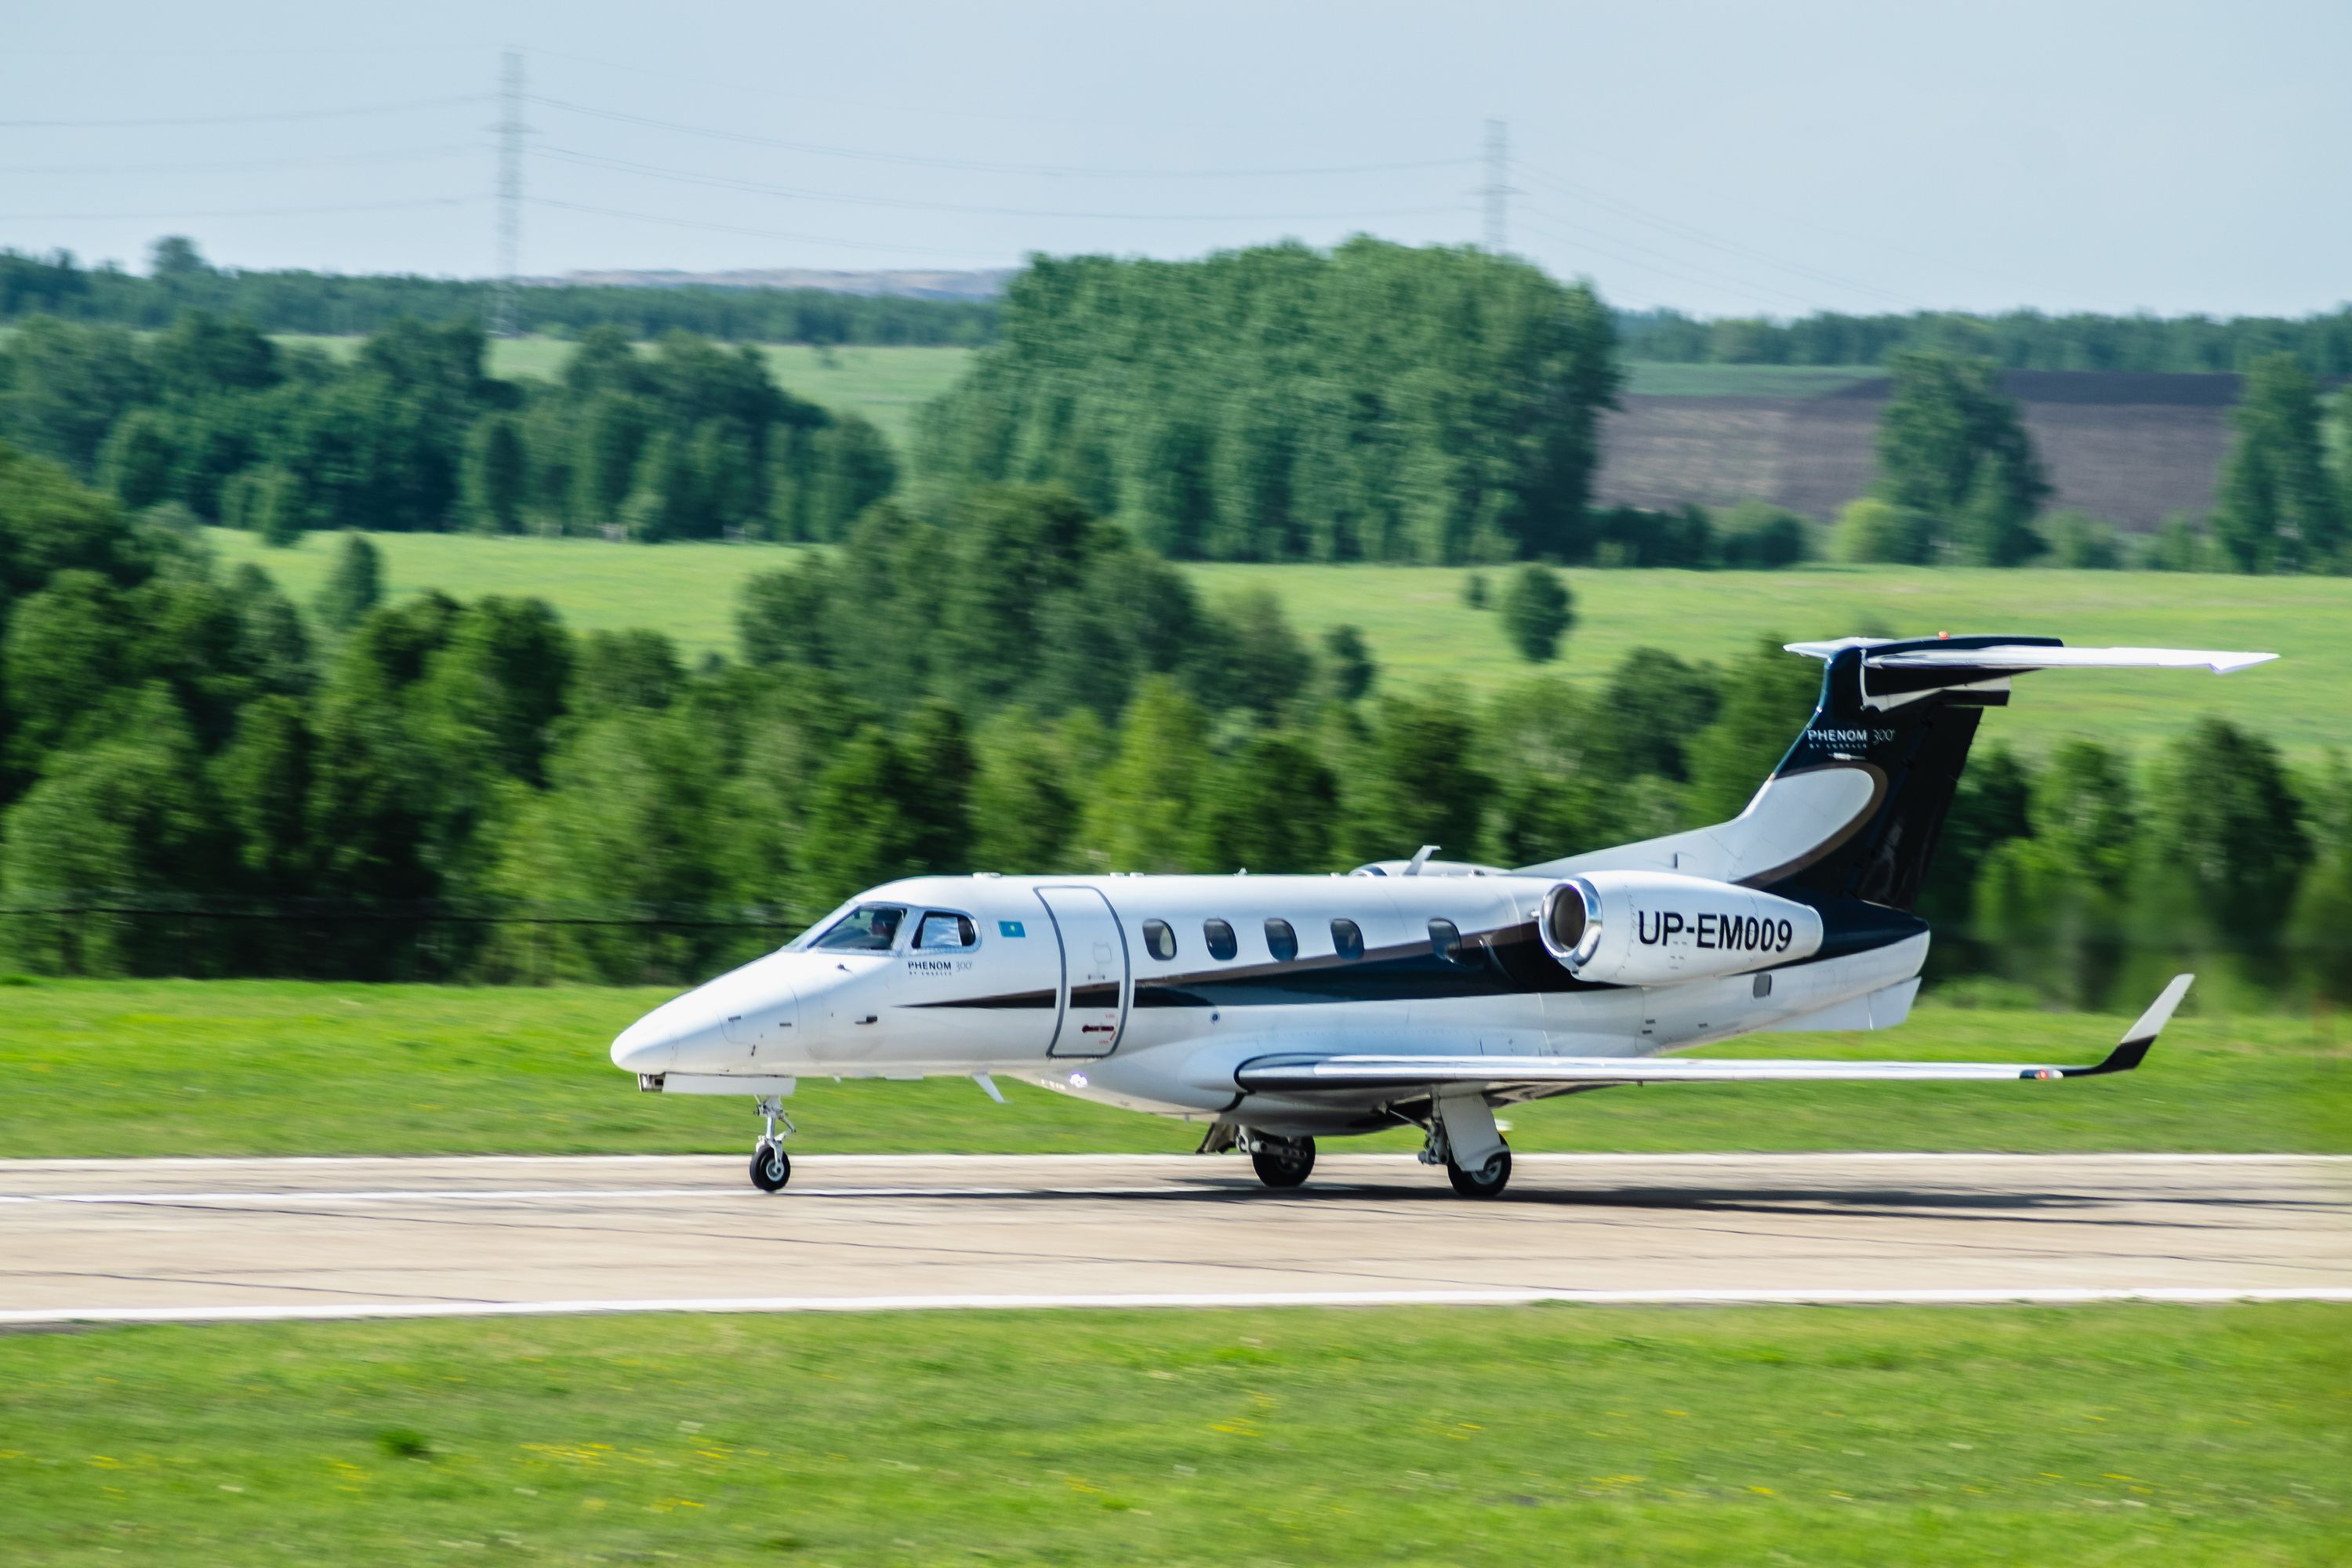 An Embraer Phenom 300 on an airport apron.